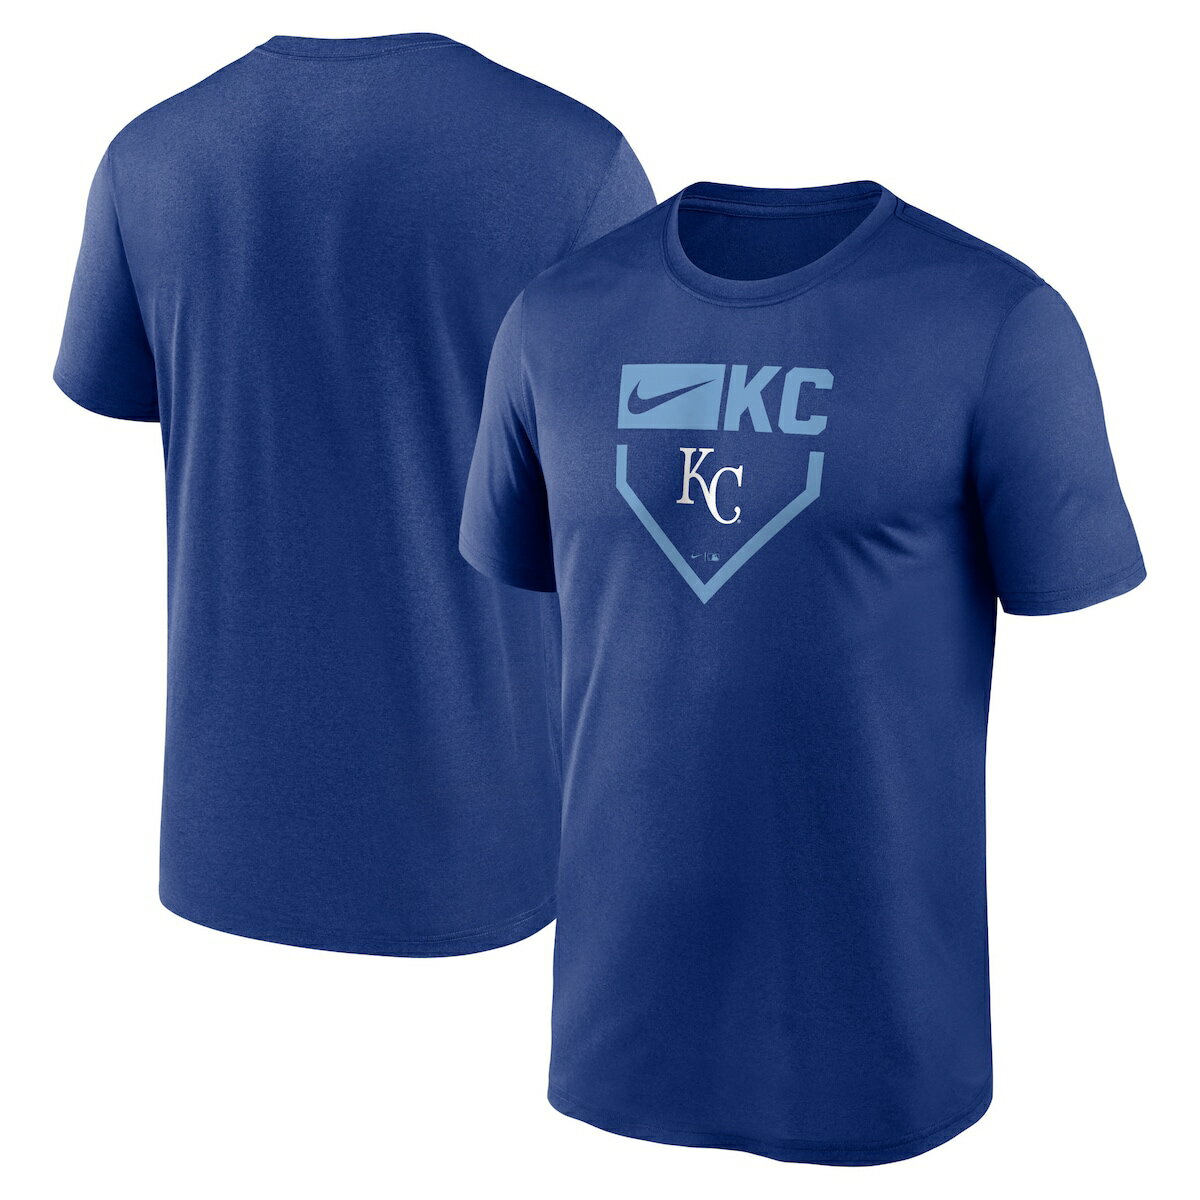 Put Kansas City Royals fandom front and center with this Legend Icon T-shirt from Nike. It features striking team graphics across the chest and moisture-wicking Dri-FIT fabric for all-day comfort. Gear up for the next trip to the ballpark with this must-have Kansas City Royals tee.Brand: NikeDri-FIT technology wicks away moistureShort sleeveOfficially licensedMachine wash, tumble dry lowMaterial: 100% PolyesterImportedScreen print graphicsCrew neck